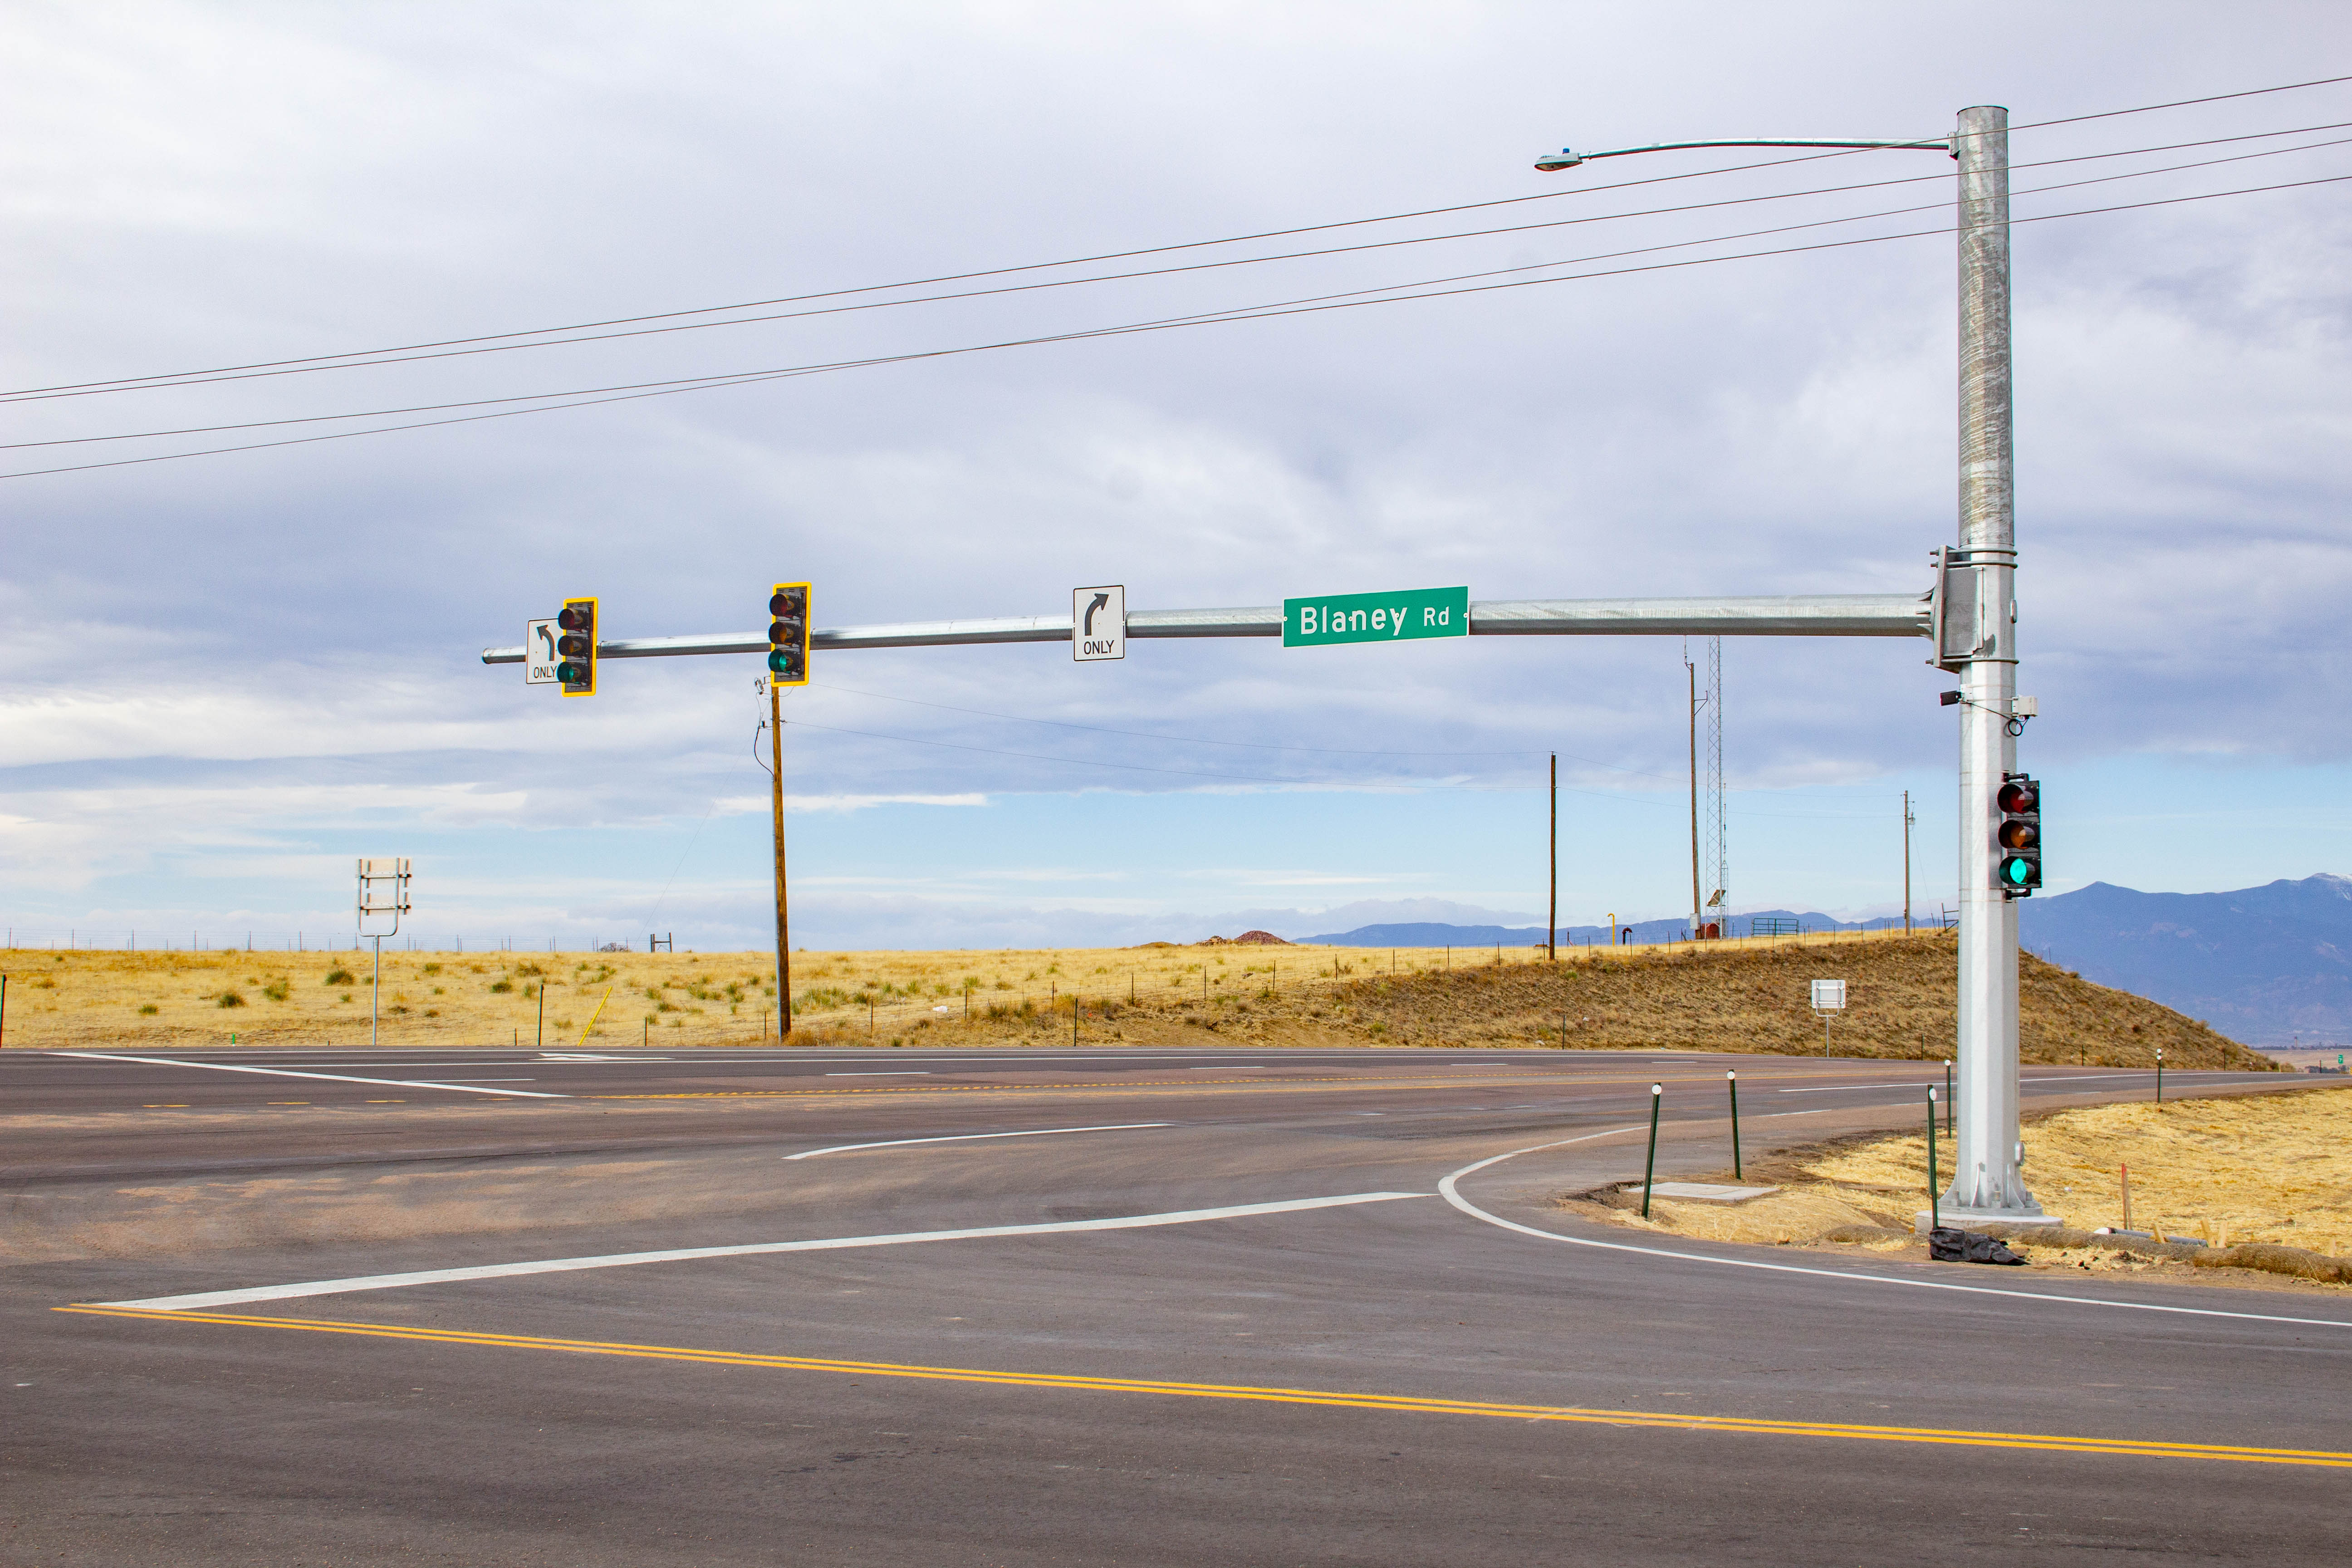 CO94 and Blaney Rd intersection.jpg detail image